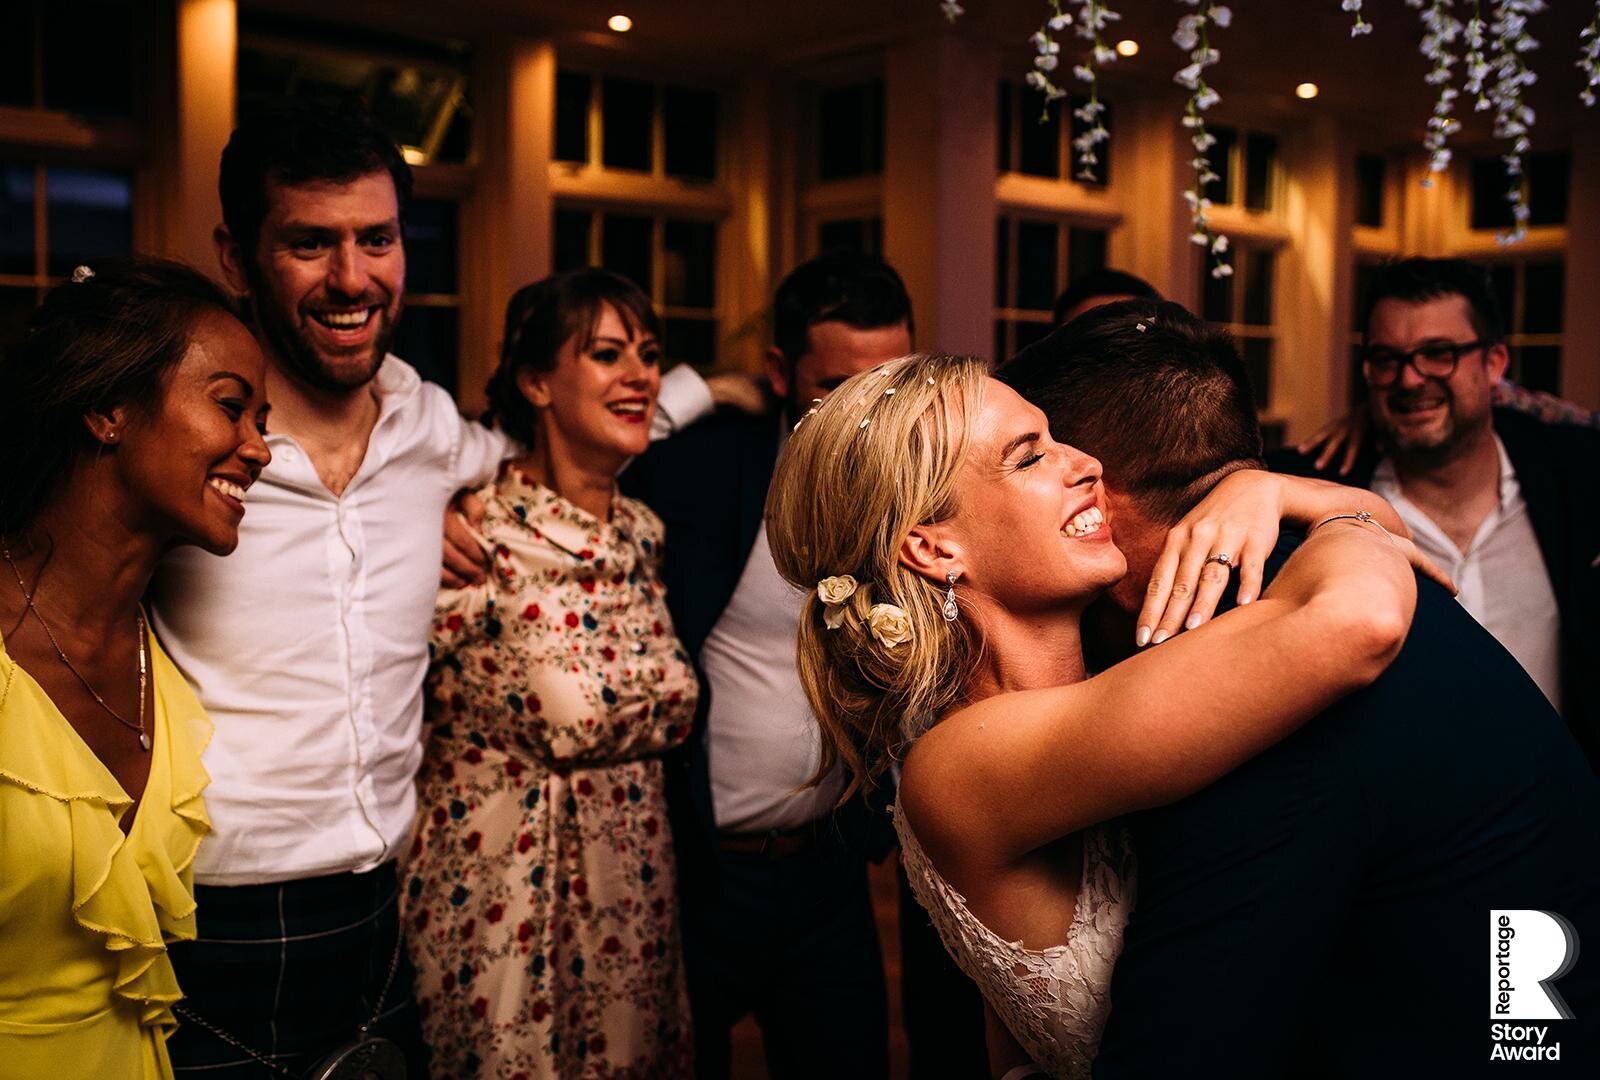  Bride and groom hugging with friends at end of the night. 